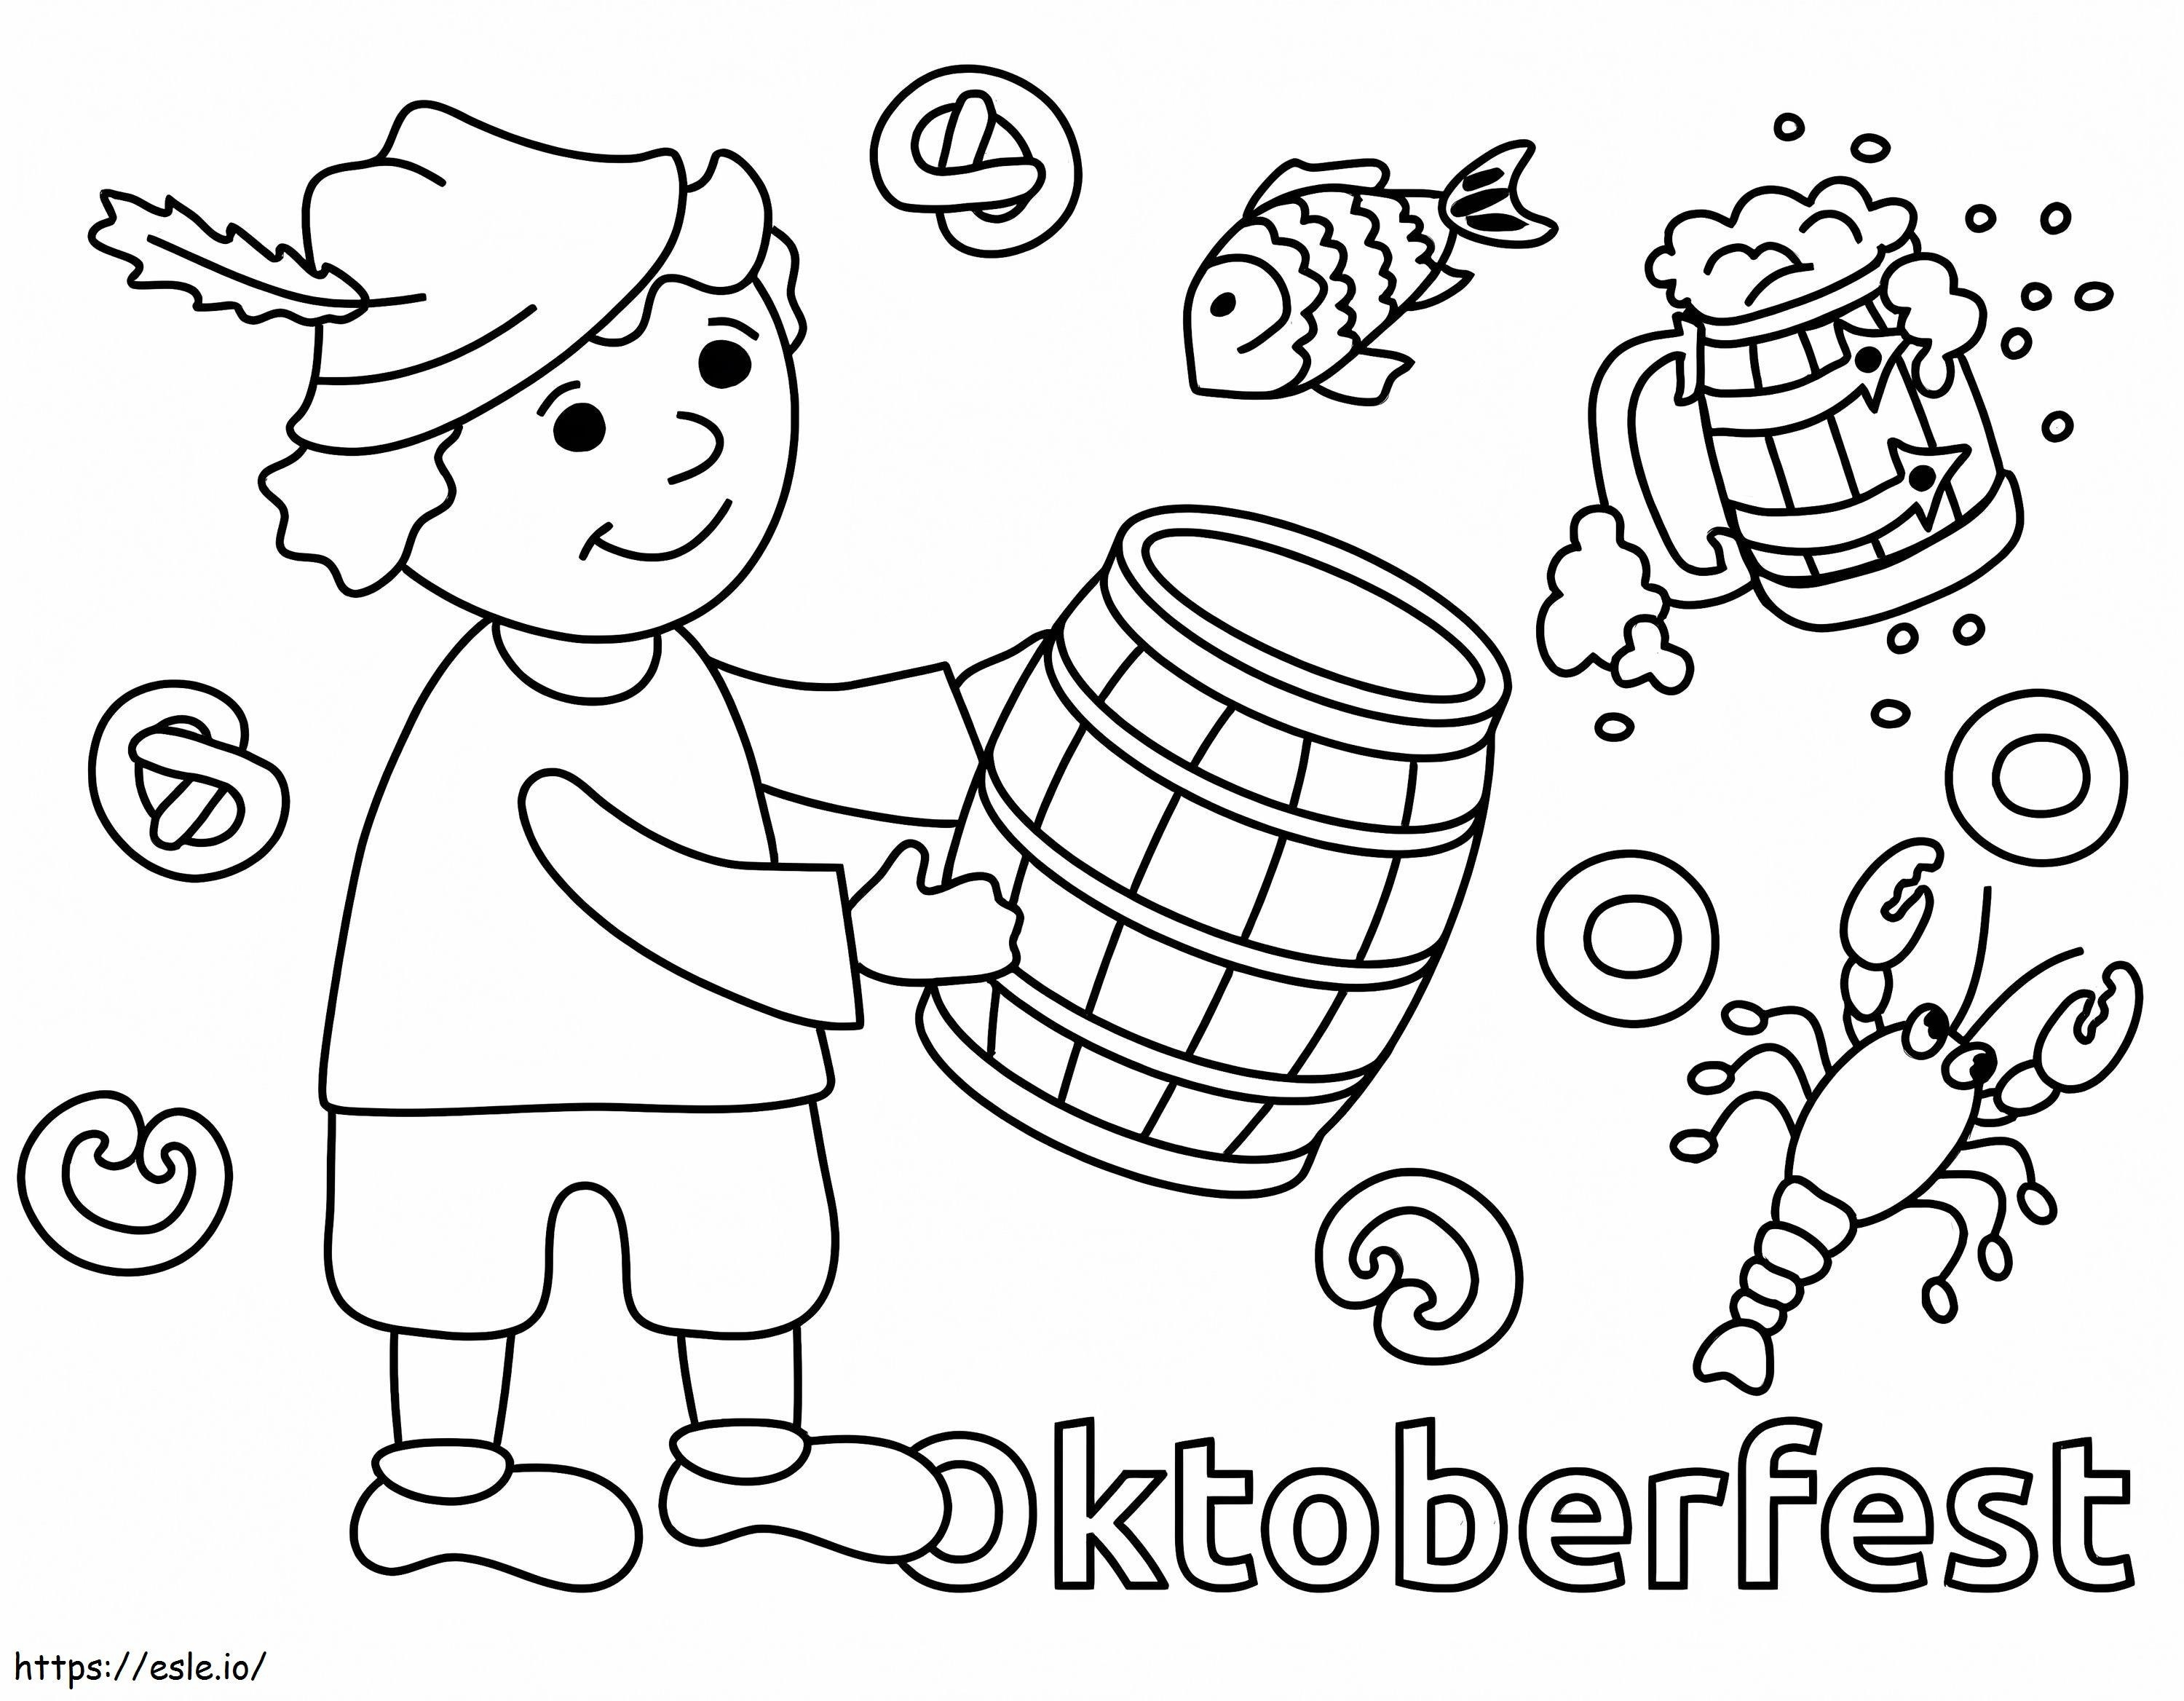 Brewer Oktoberfest coloring page